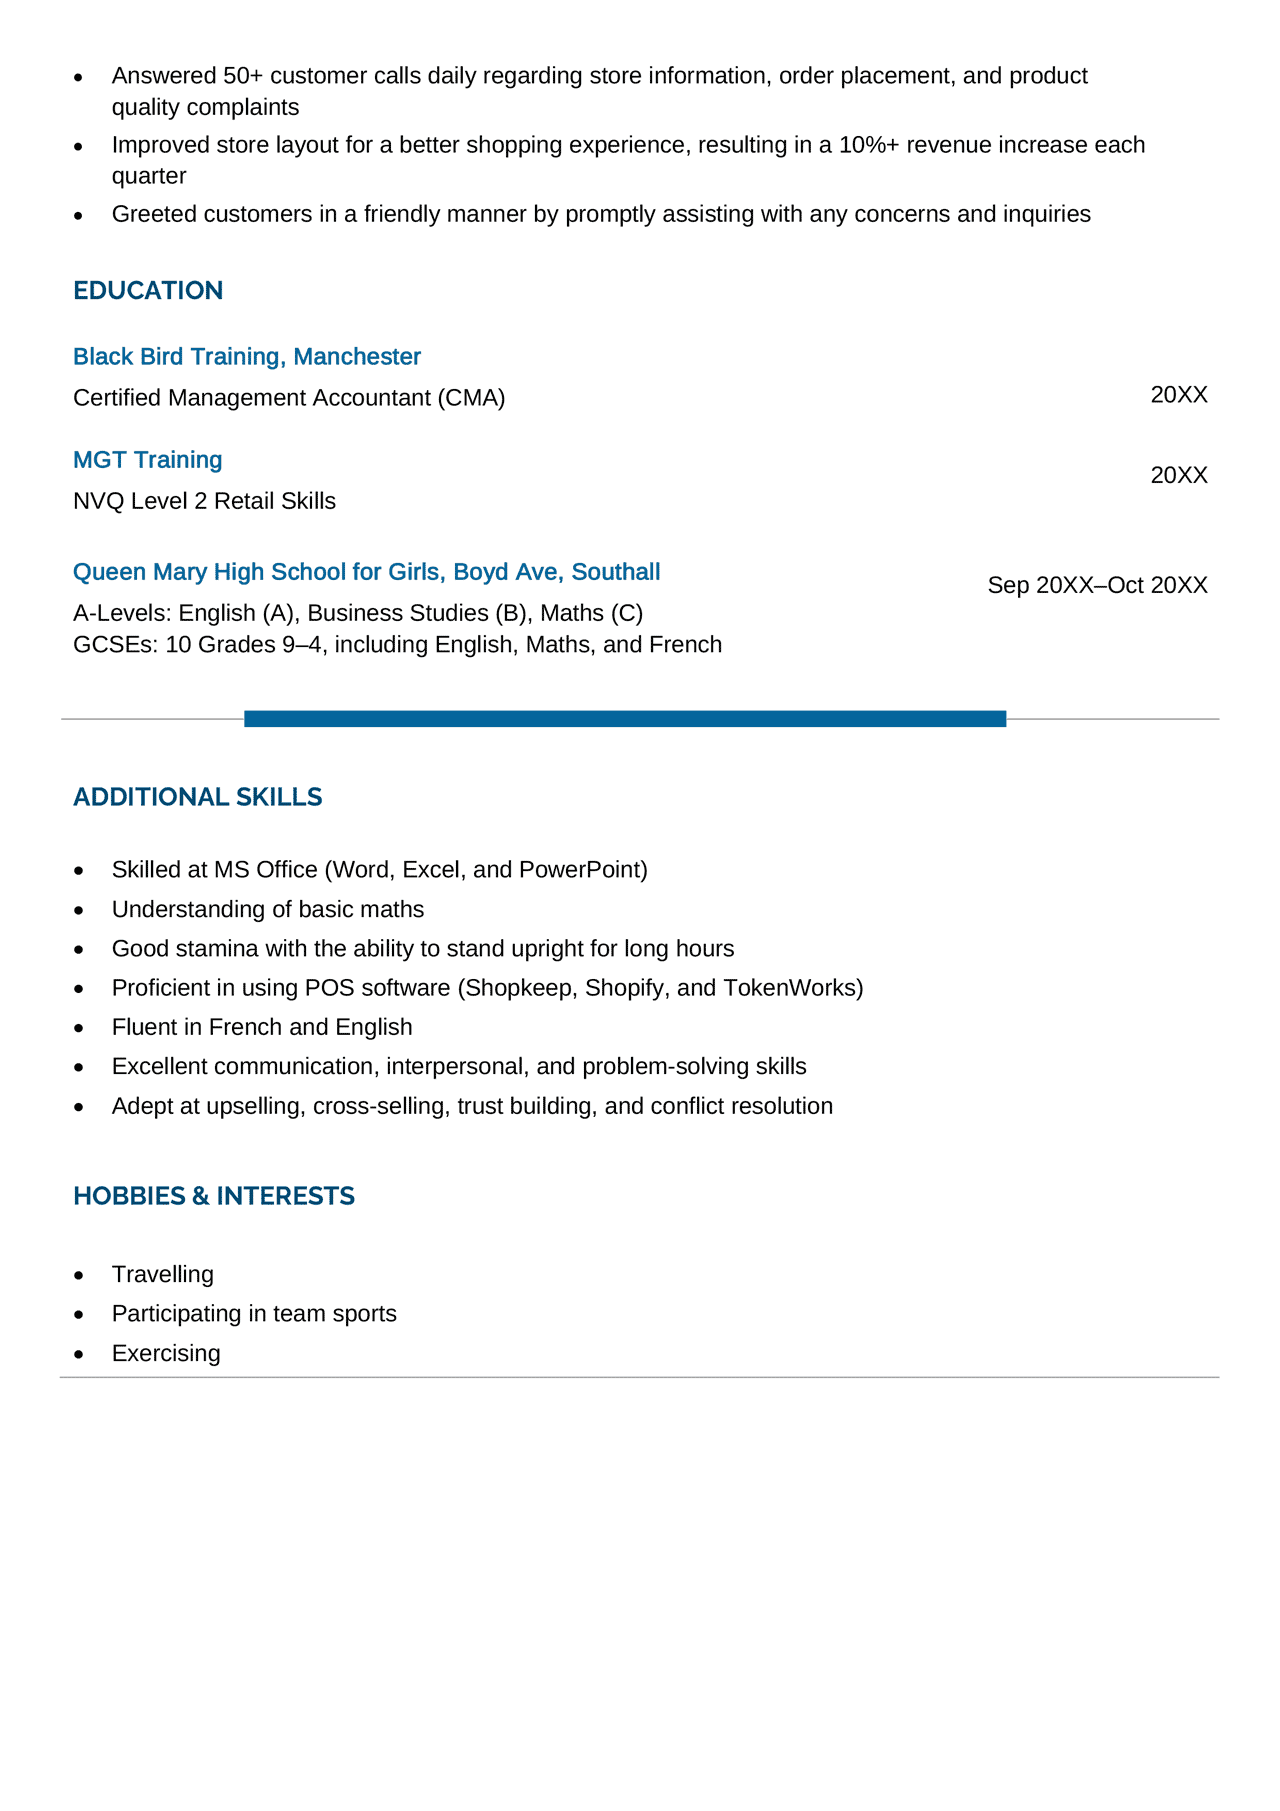 The second page of a Tesco CV example.